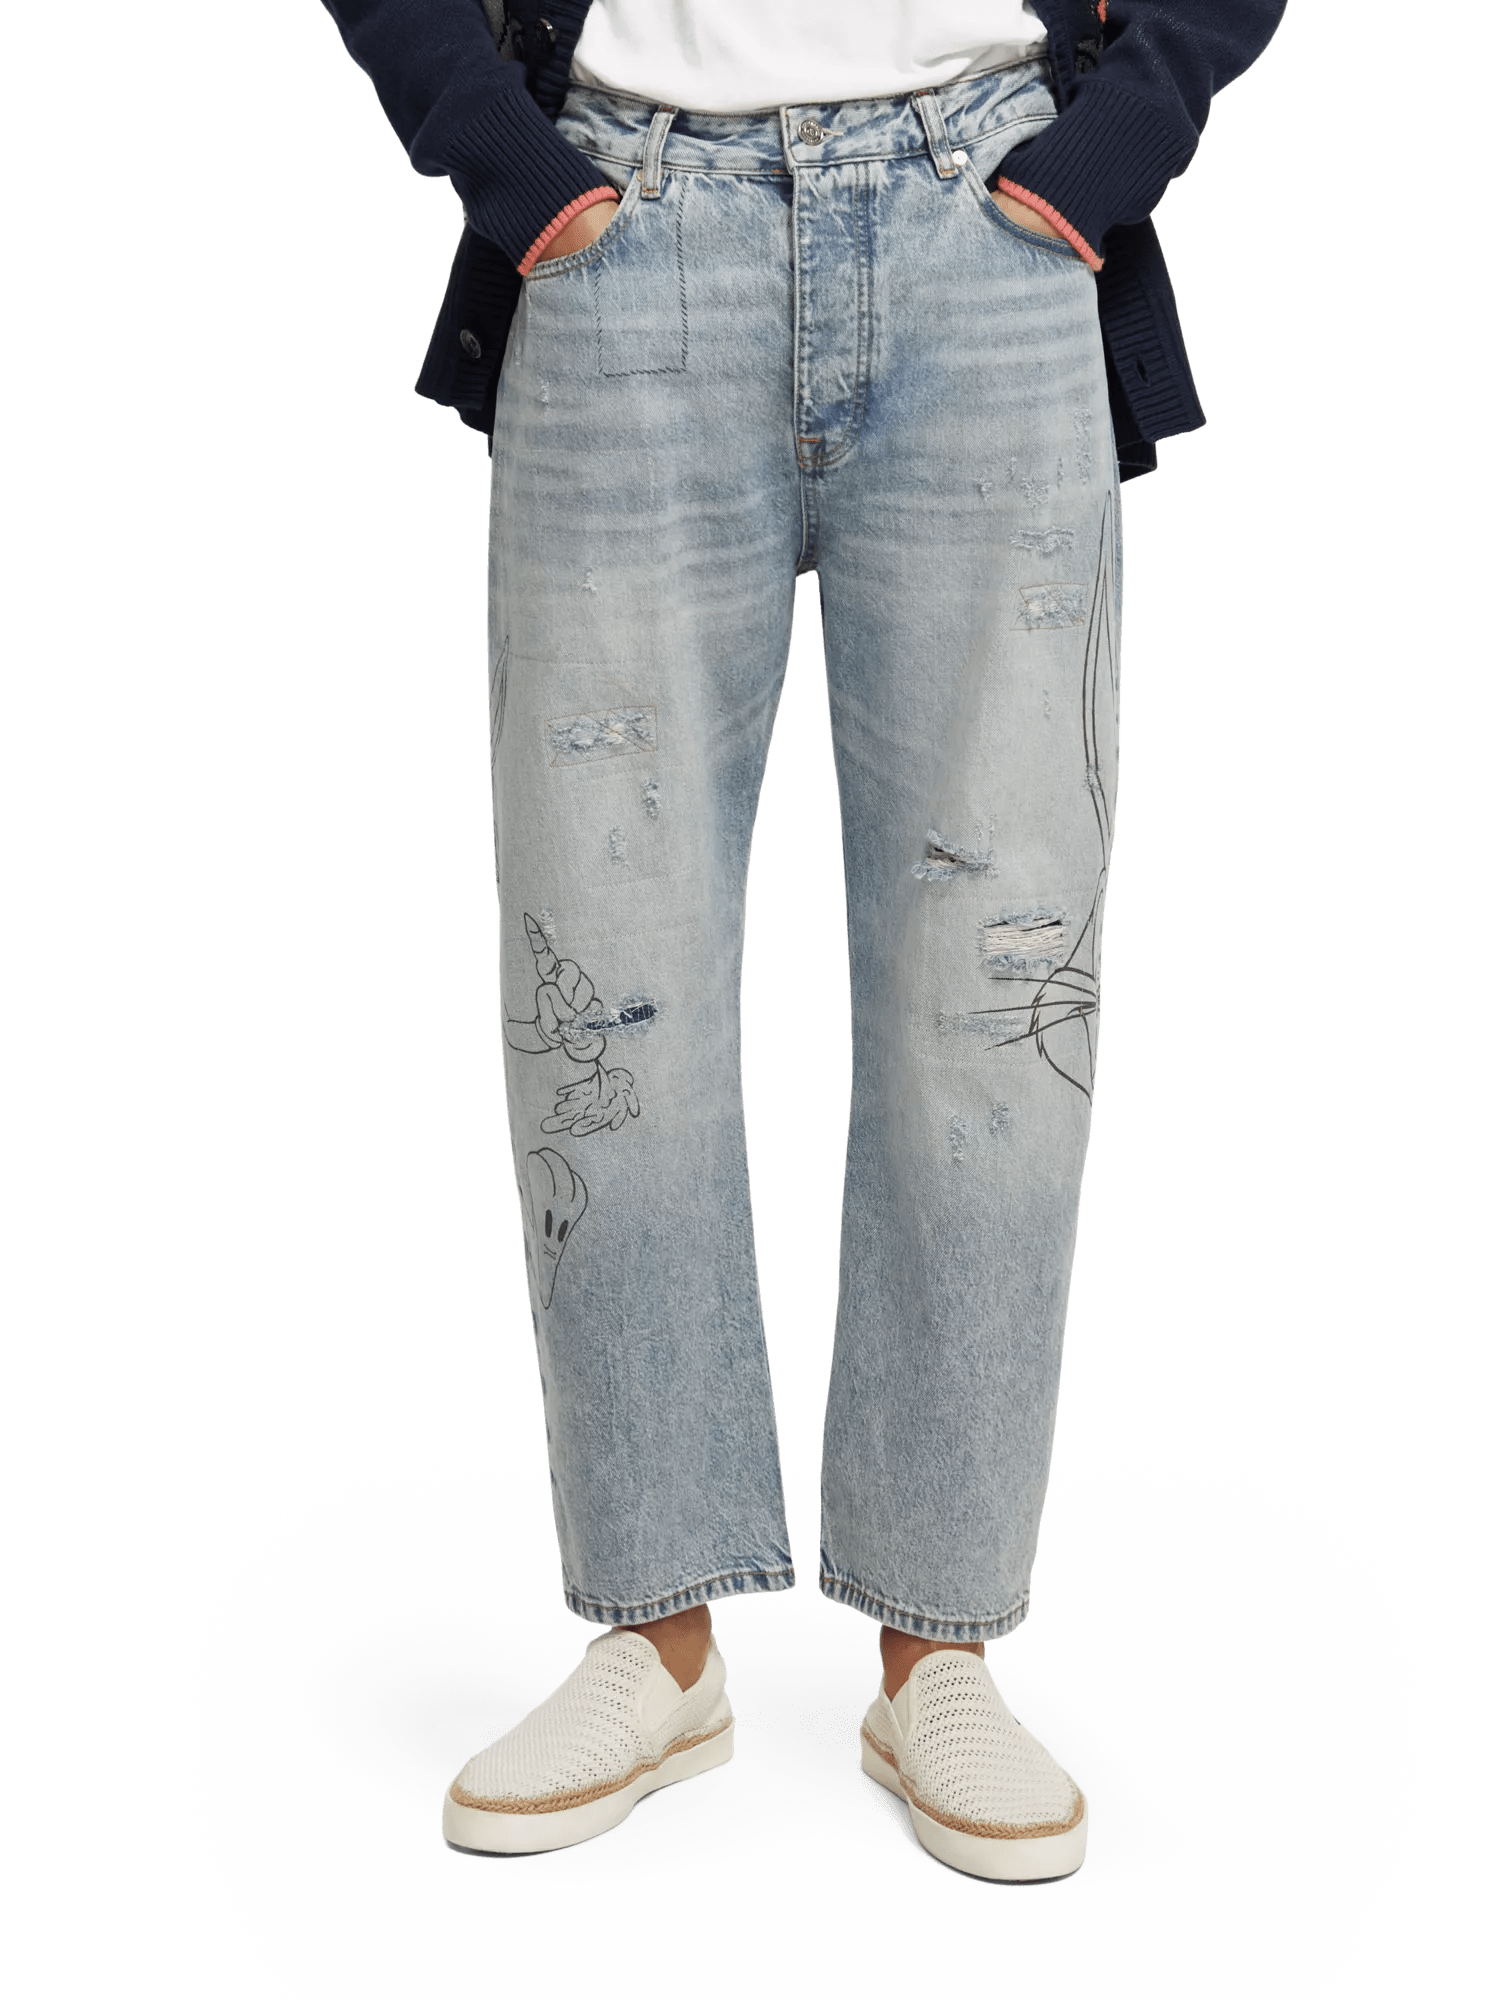 Scotch & Soda Bugs Bunny- The Spirit unisex relaxed jean -That's All Folks NHD-CRP